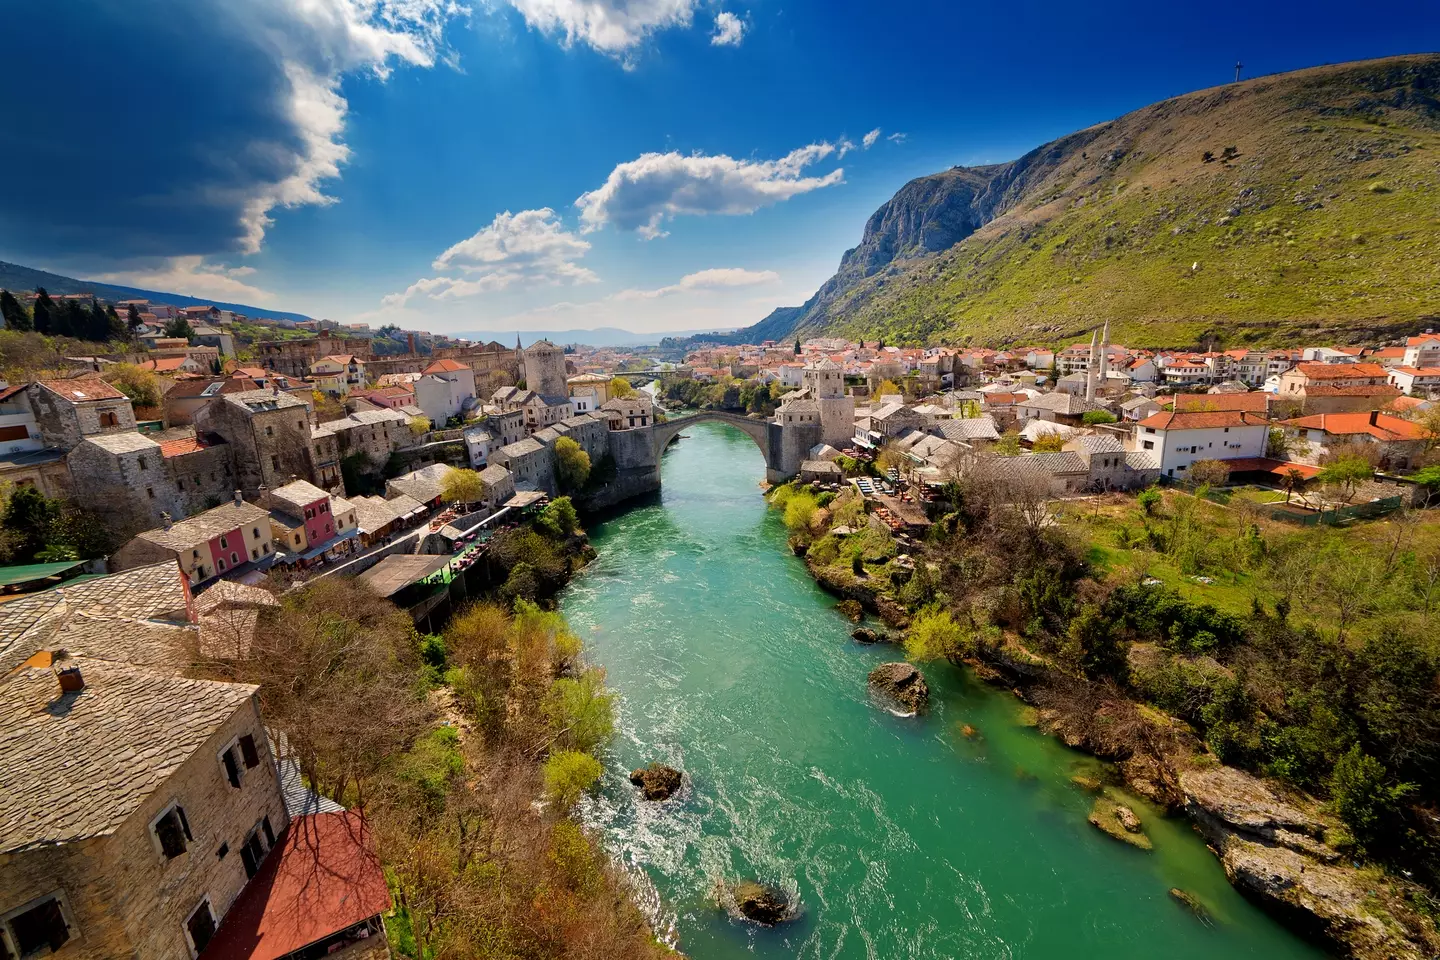 Mostar bridge and Neretva River from above (Getty Stock Images)